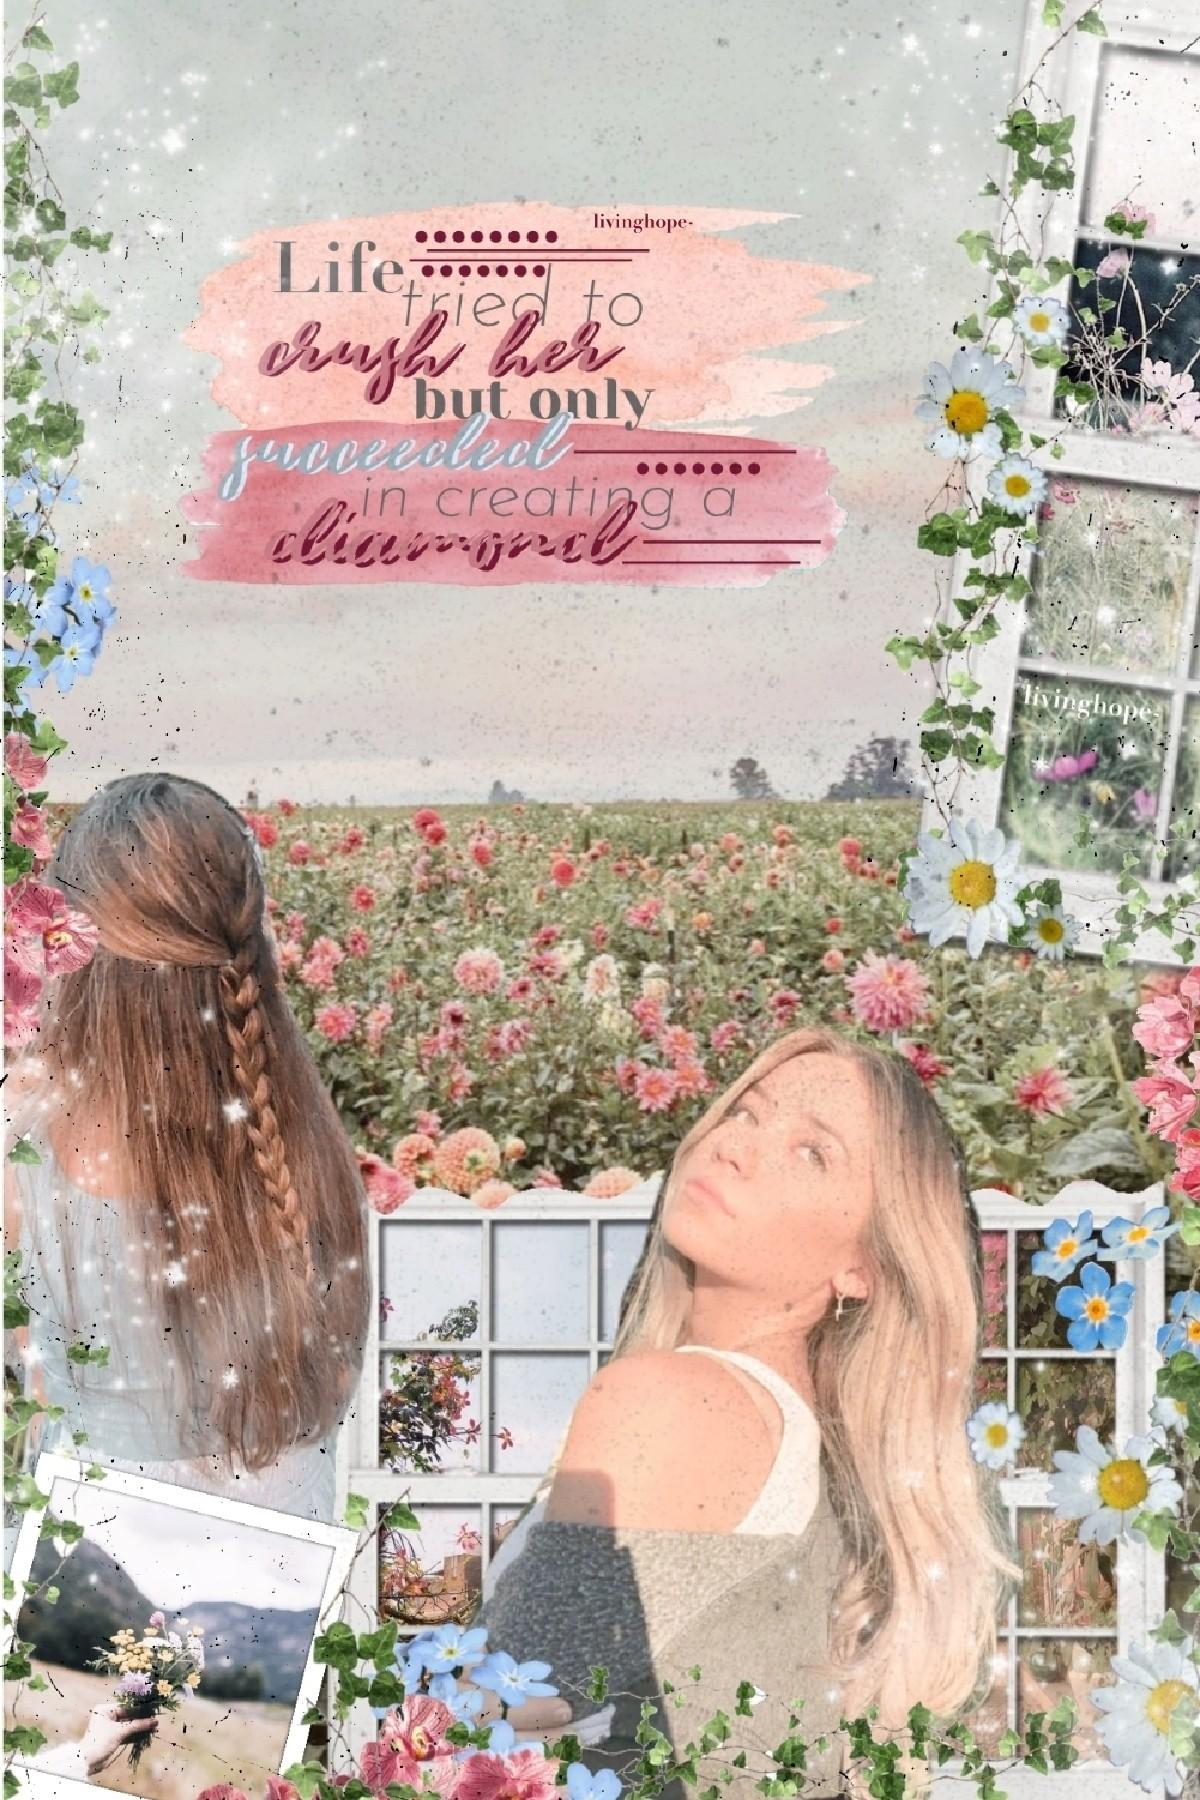 4•3•22 (tap!)
Happy April! PC fixed there glitch and I can see my collages again. here's another collage with my new theme! I'm going to start this thing where everytime I post a collage I'll post a quote or a bible verse in the remixes! so I'm starting t